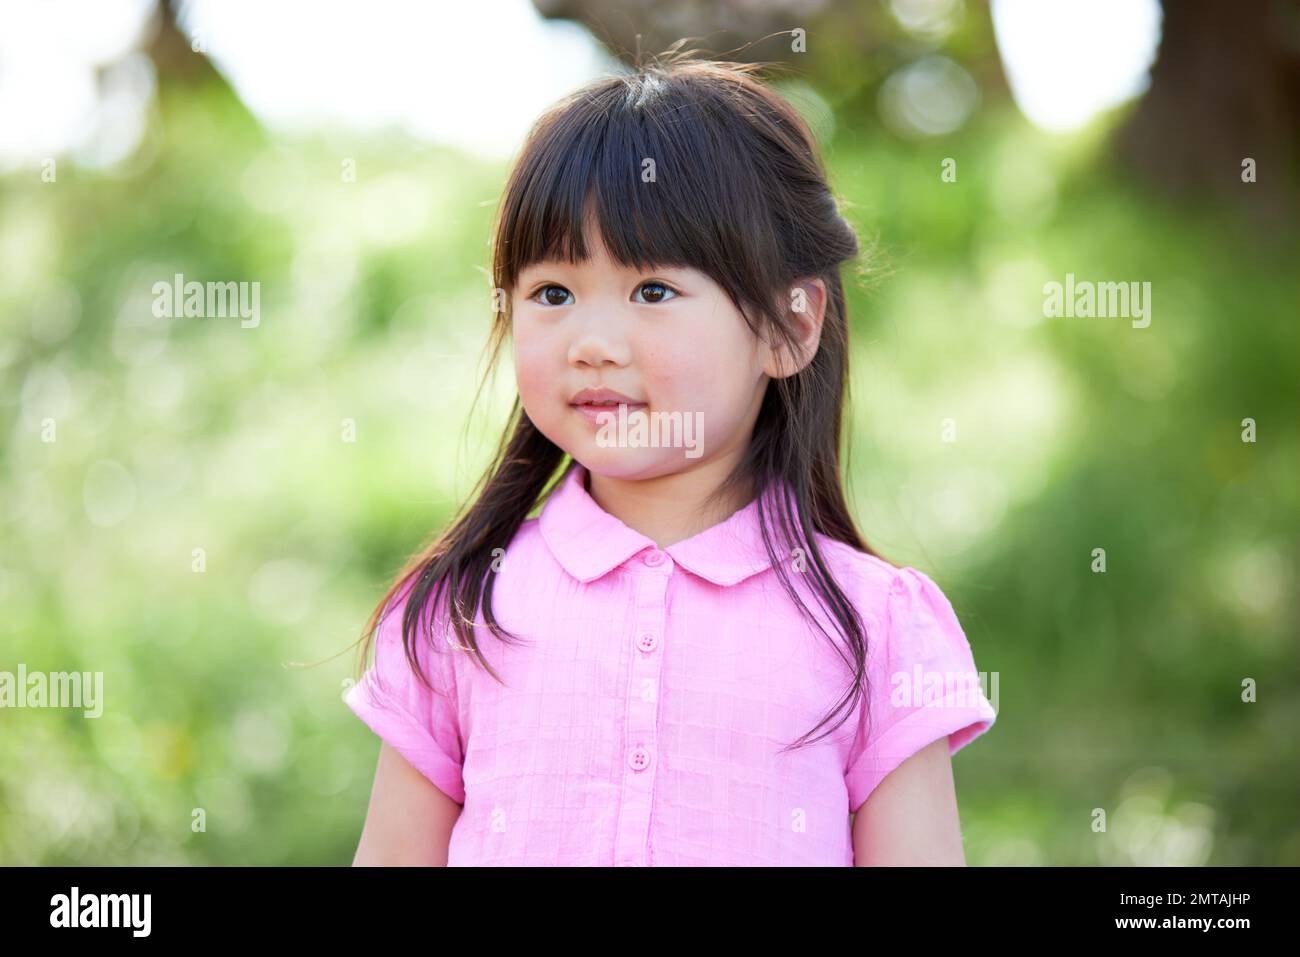 Japanese kid portrait in a city park Stock Photo